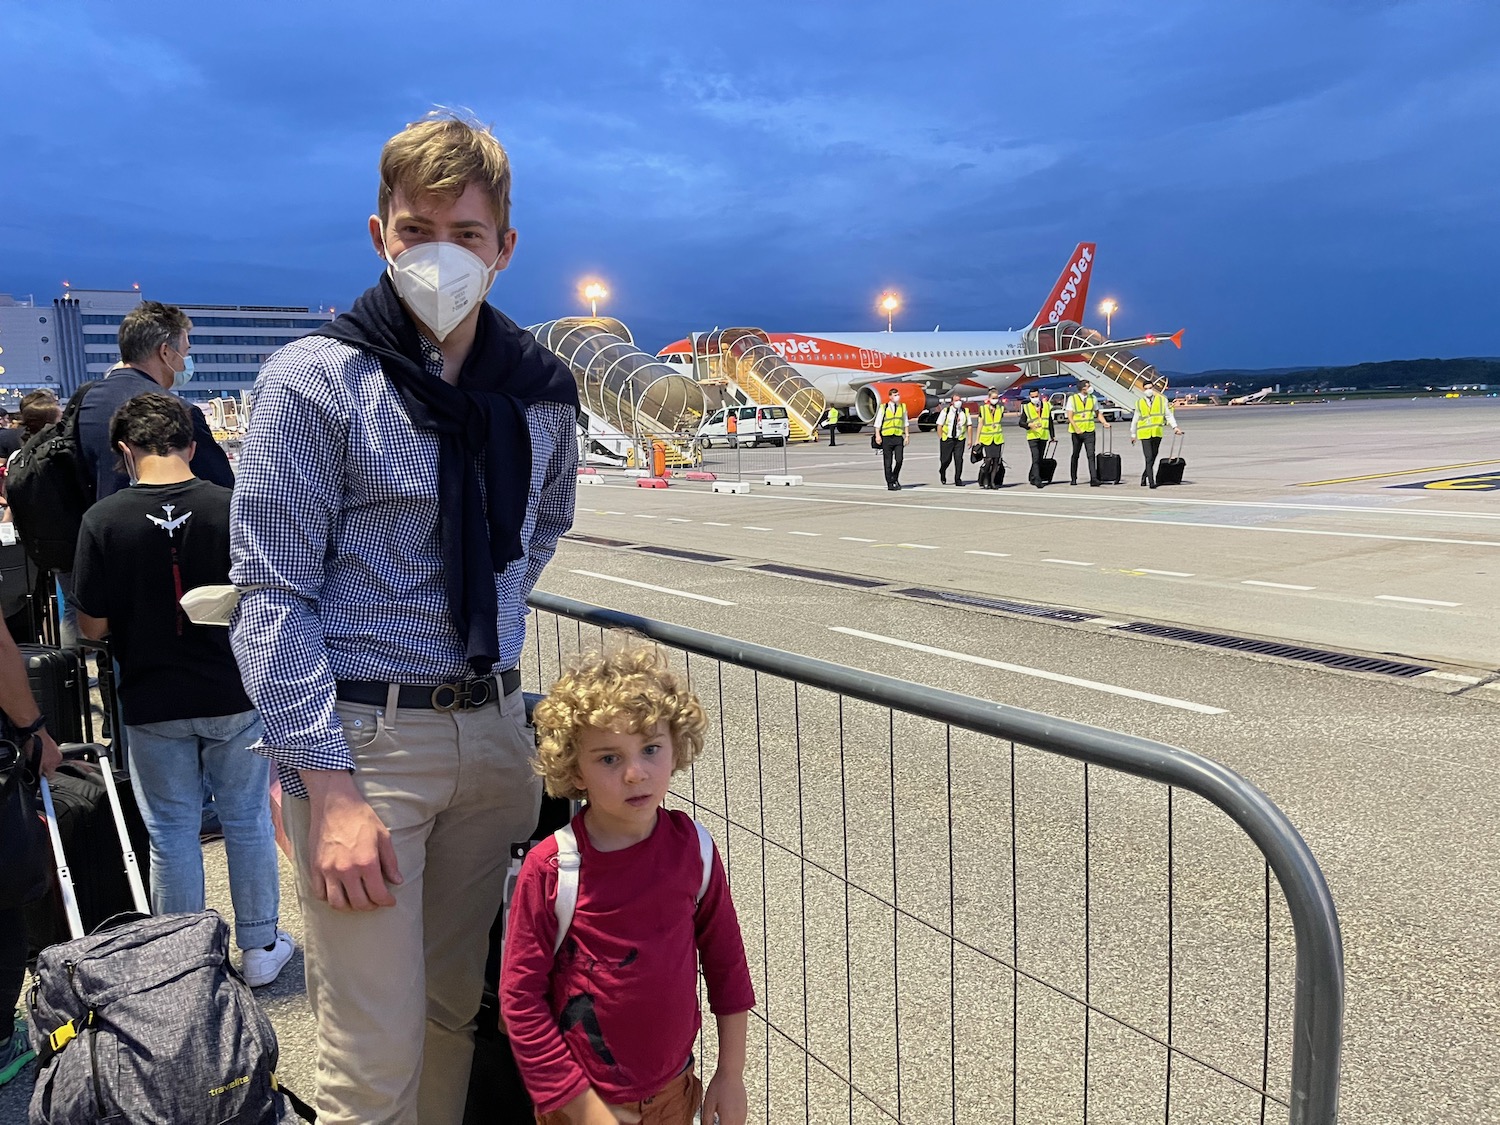 a man and child standing in front of an airplane